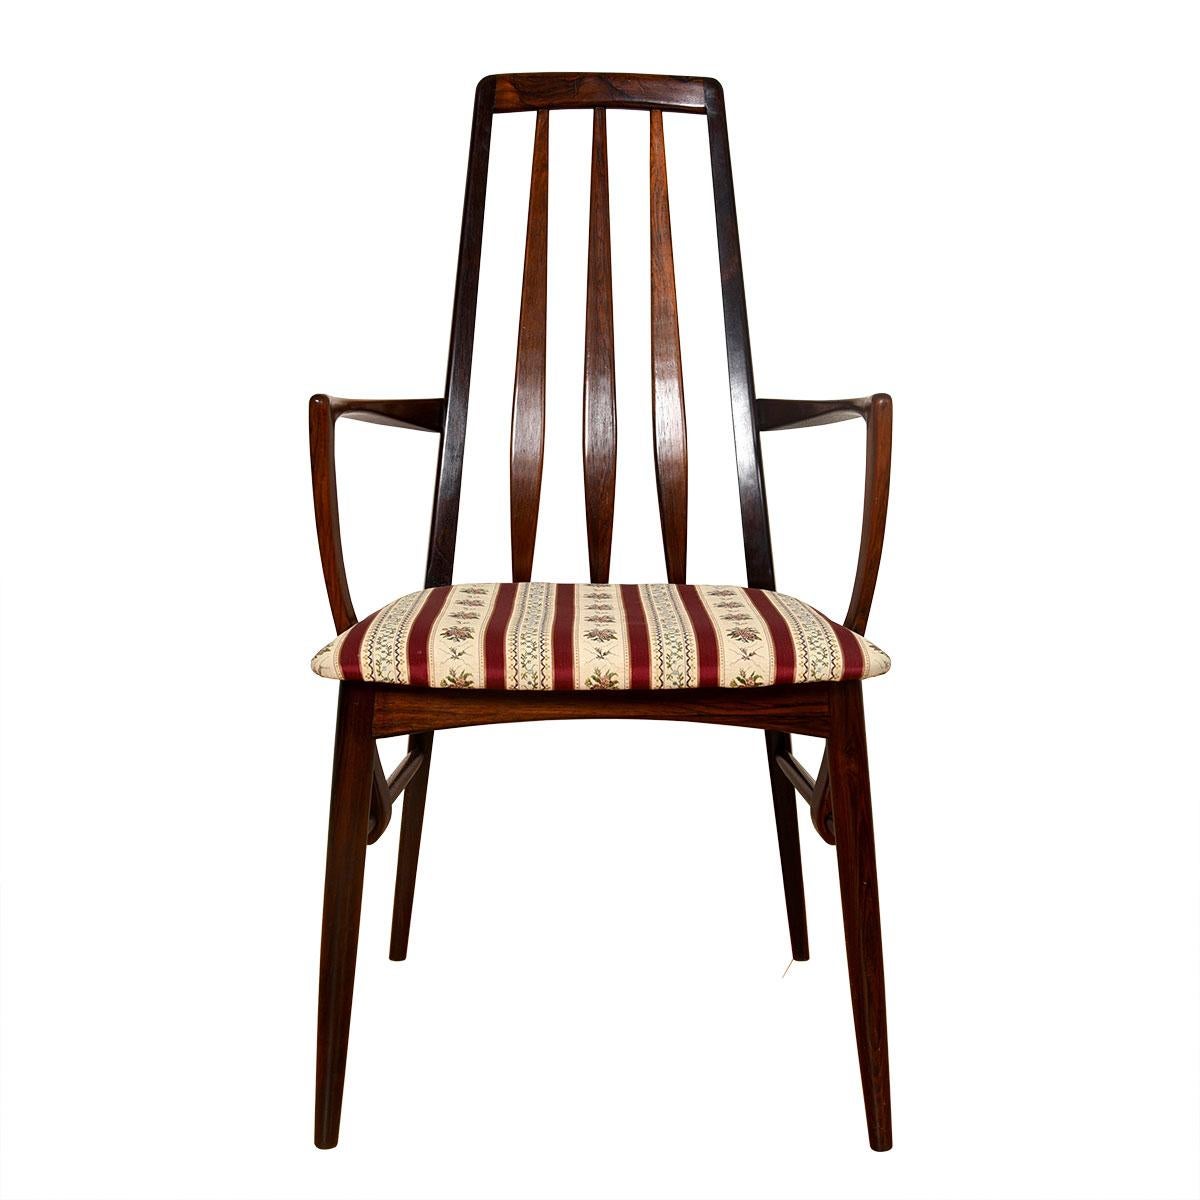 Pair of Danish Rosewood Arm Chairs by Koefoeds Hornslet

Additional information:
Material: Rosewood
Beautifully Proportioned and Refined Set of Rosewood Ladder Back Dining Chairs. Measurements are Approximate.
The Set Was in A Formal Dining